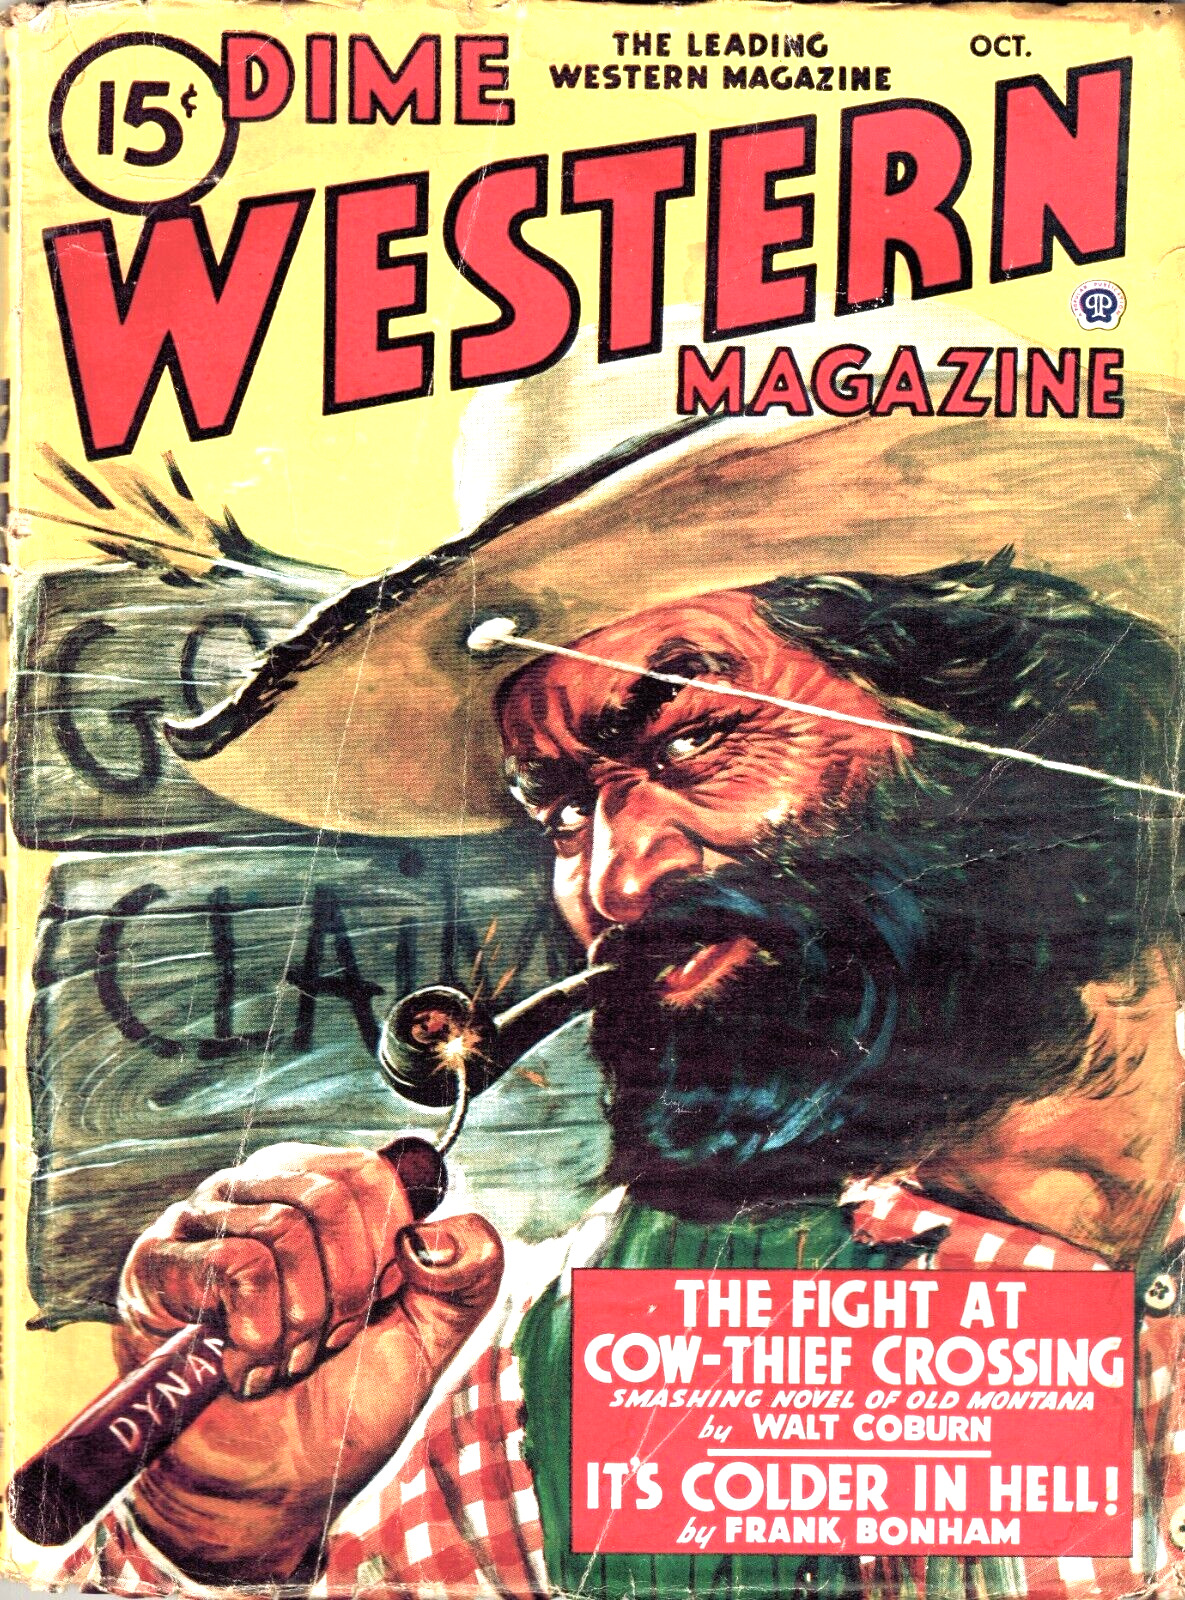 Dime Western Magazine OCT  1947  Very Good Condition CLEAN & BRIGHT COVER ILLUS